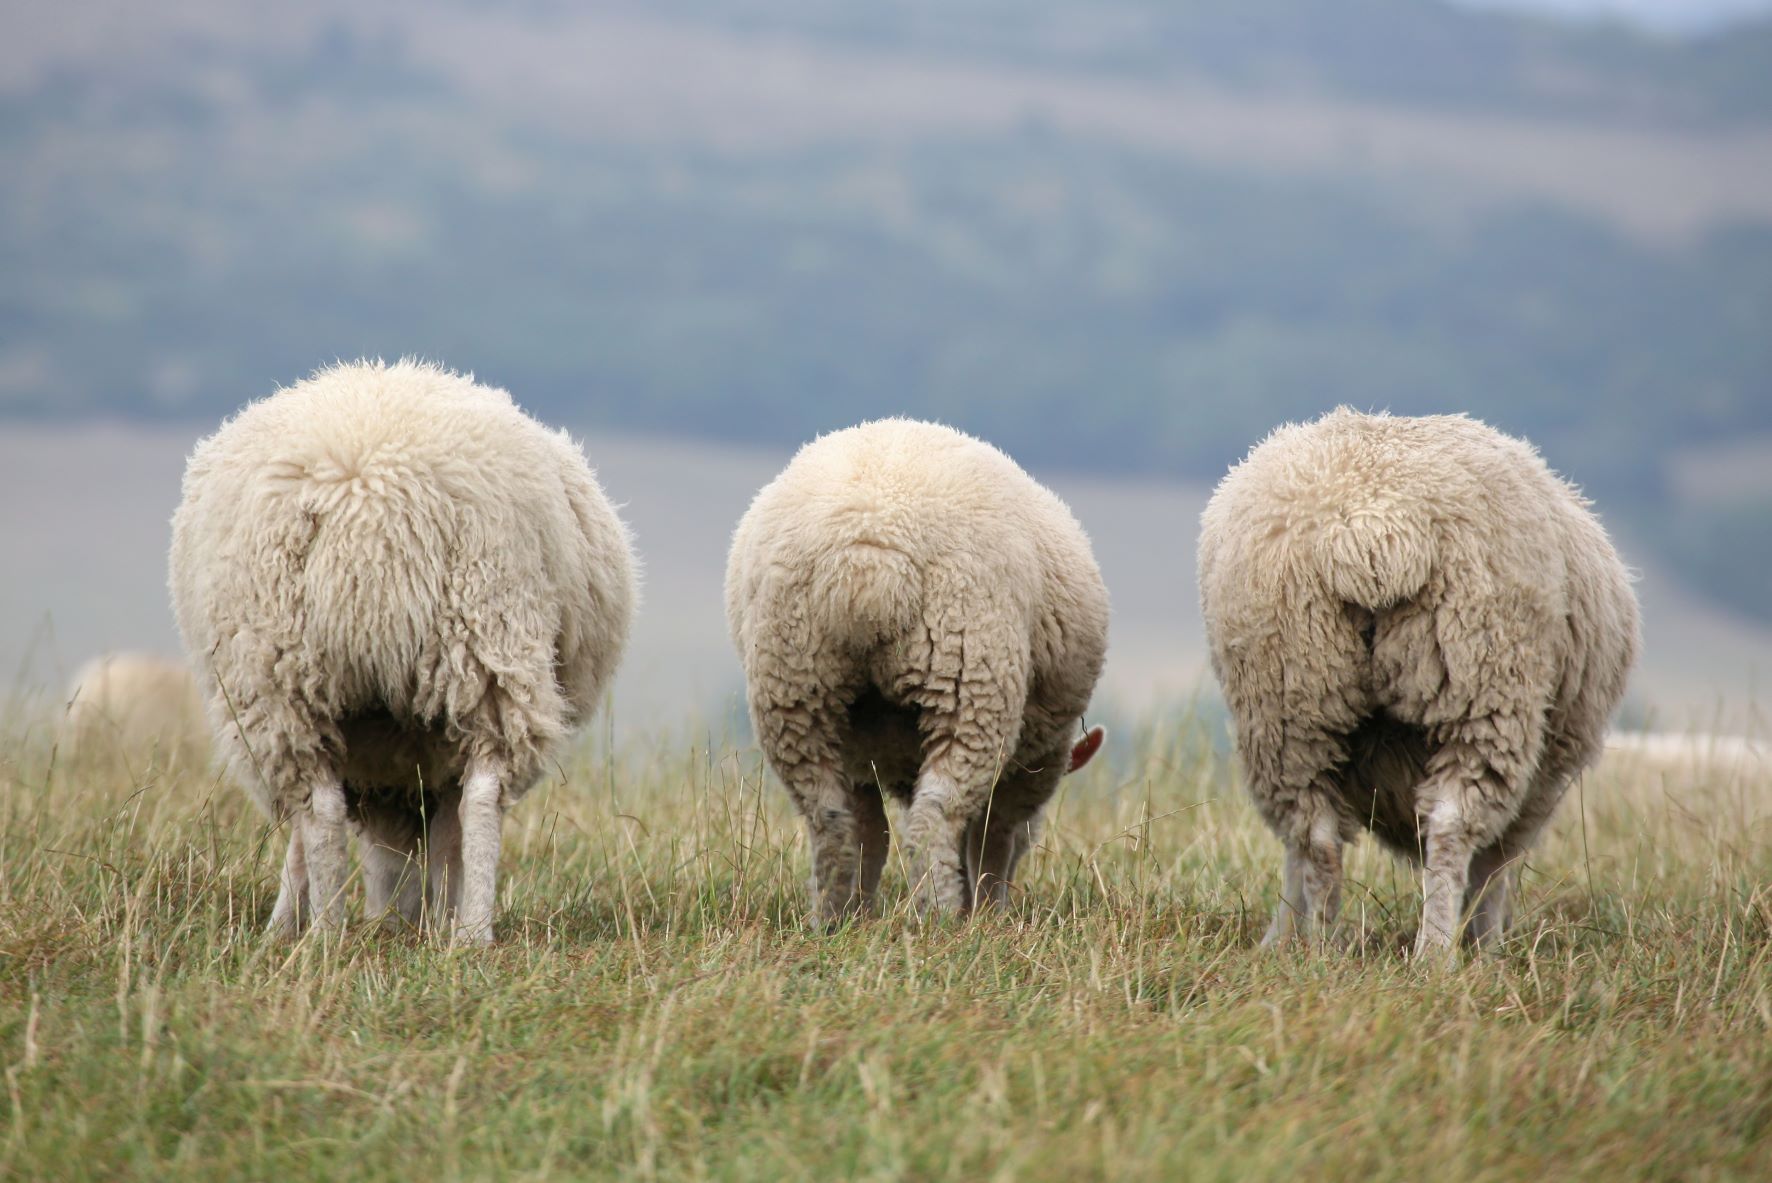 Three sheep eating grass in a paddock with their backsides facing the camera.